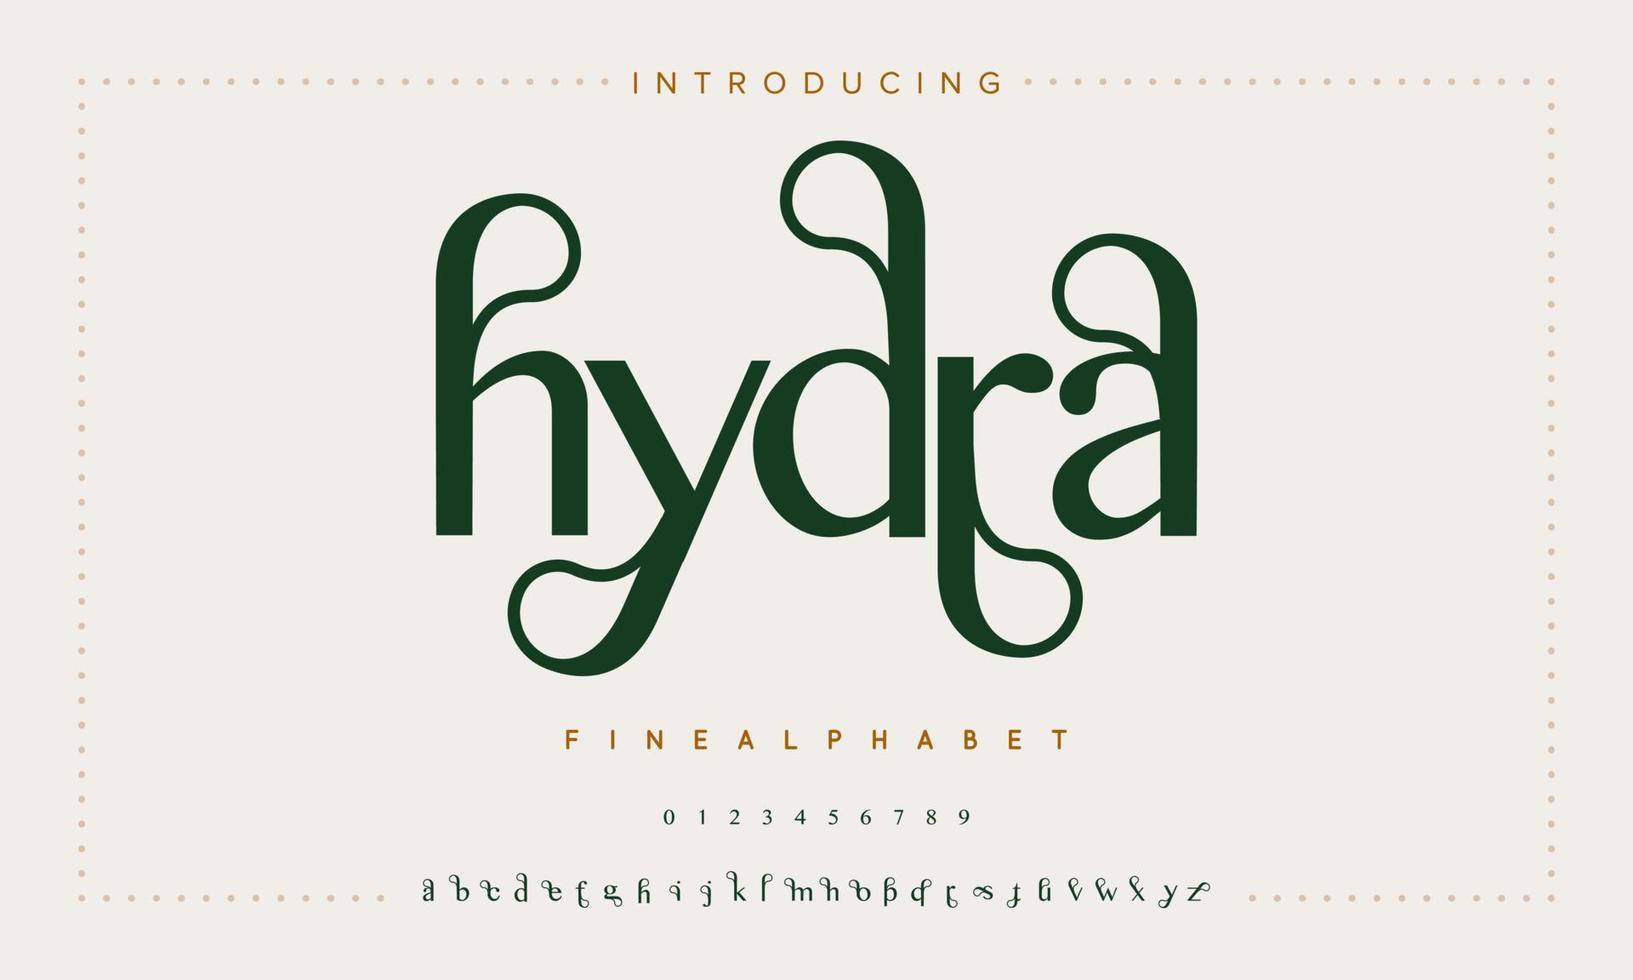 Hydra luxury Fashion font alphabet. Typography typeface uppercase lowercase and number. vector illustration